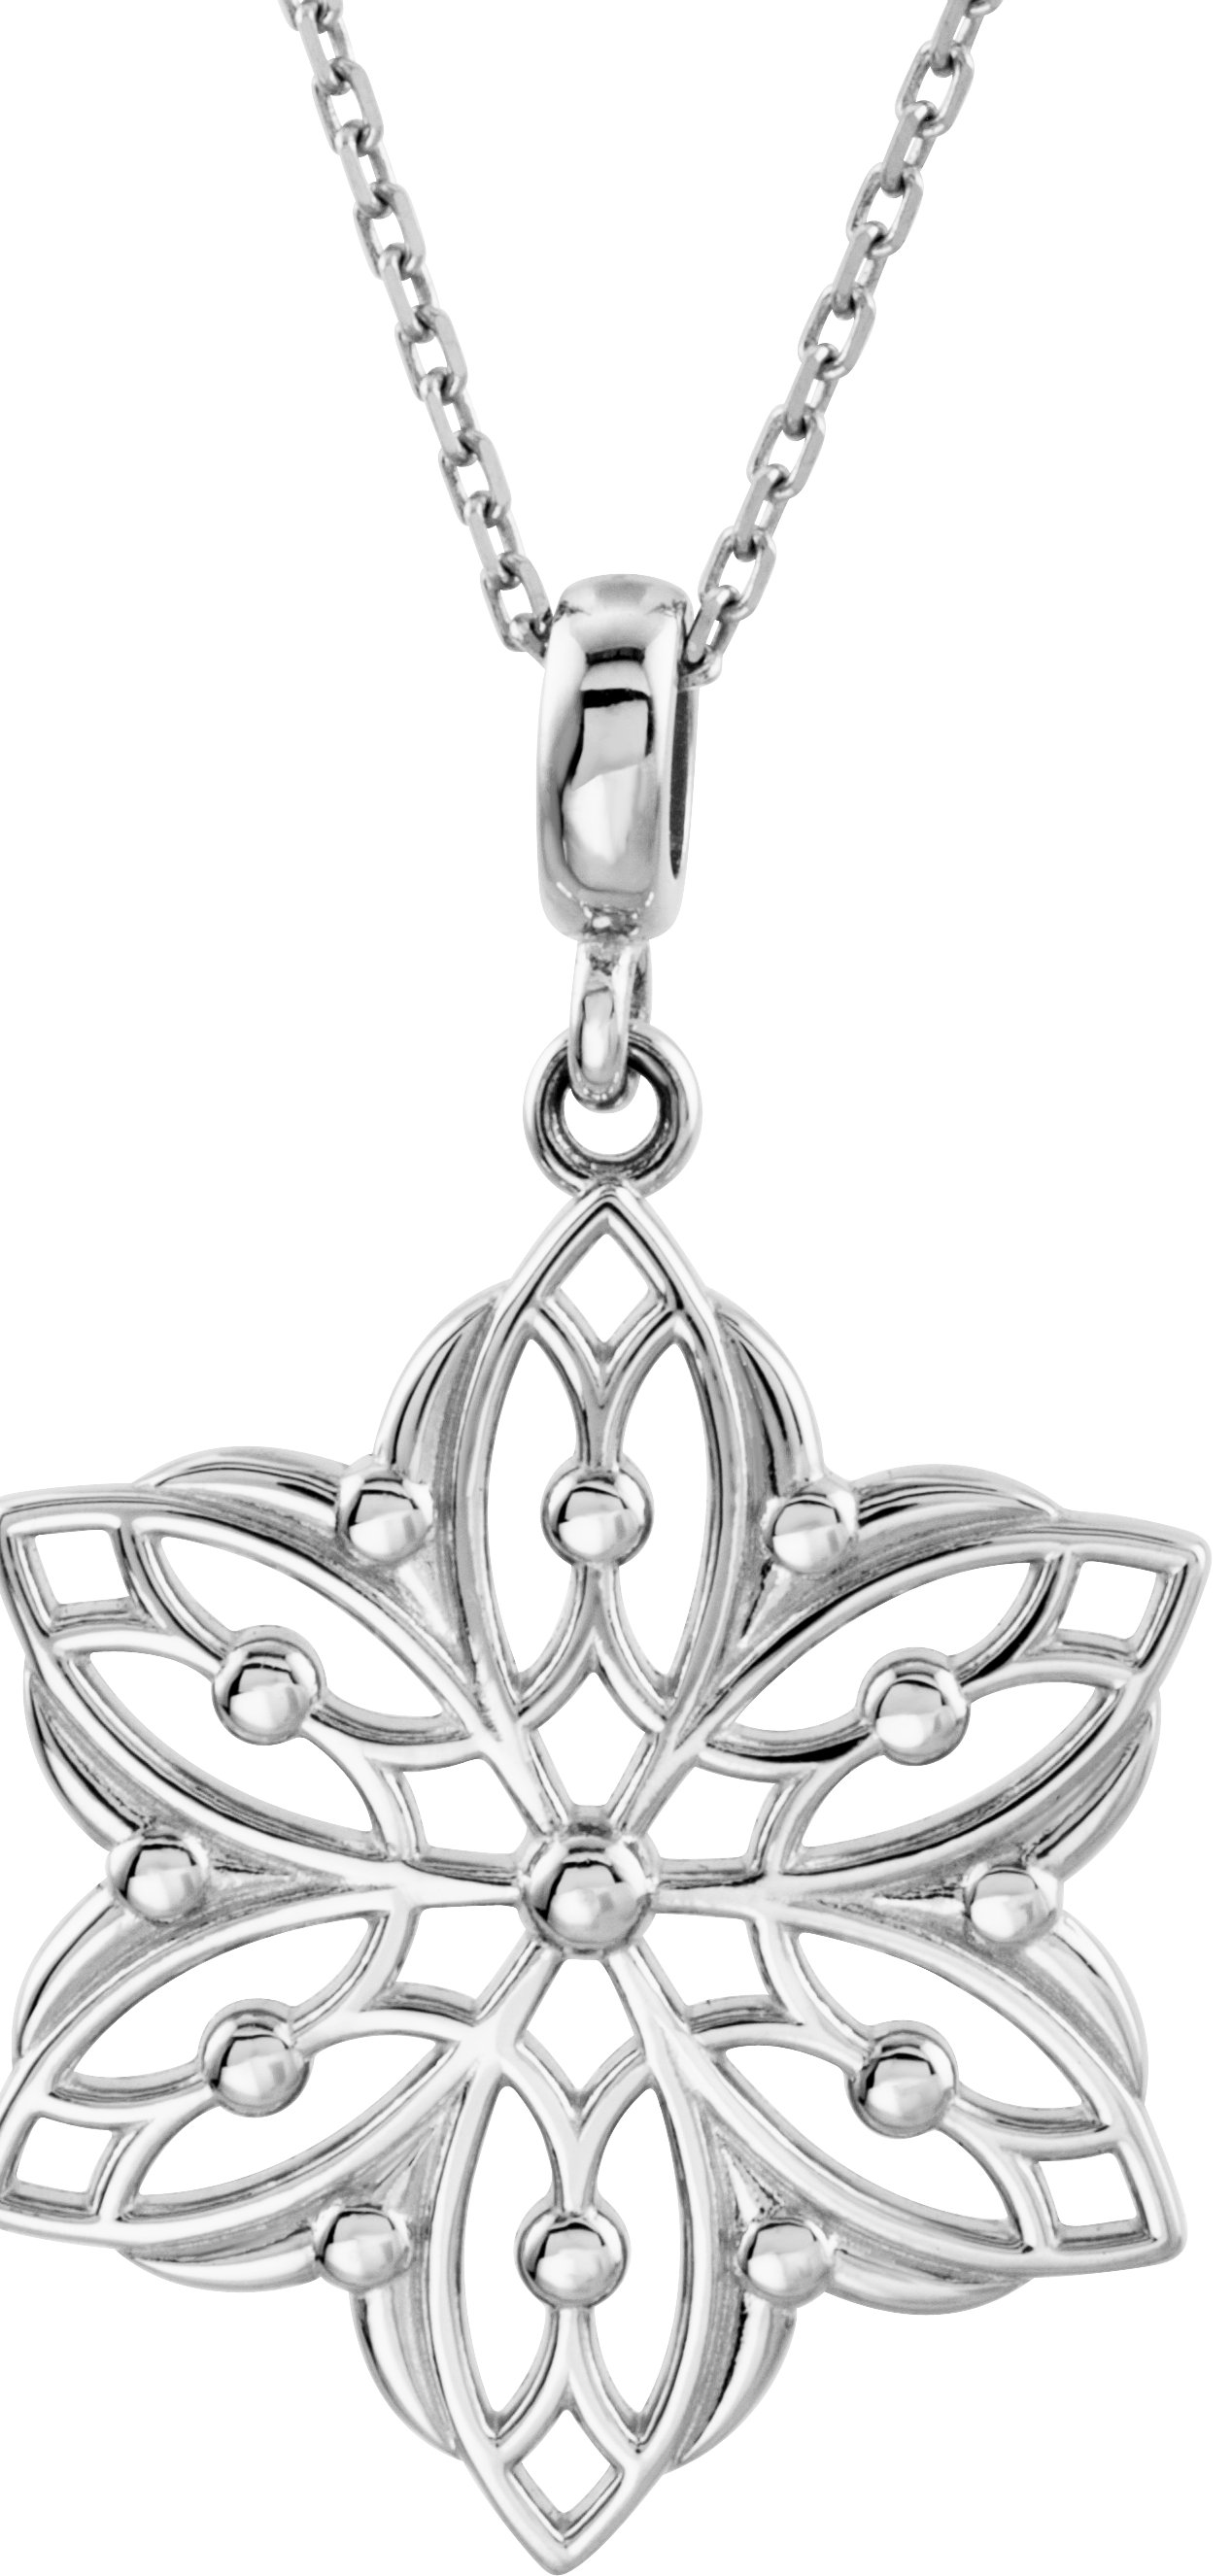 Sterling Silver Decorative 18" Necklace